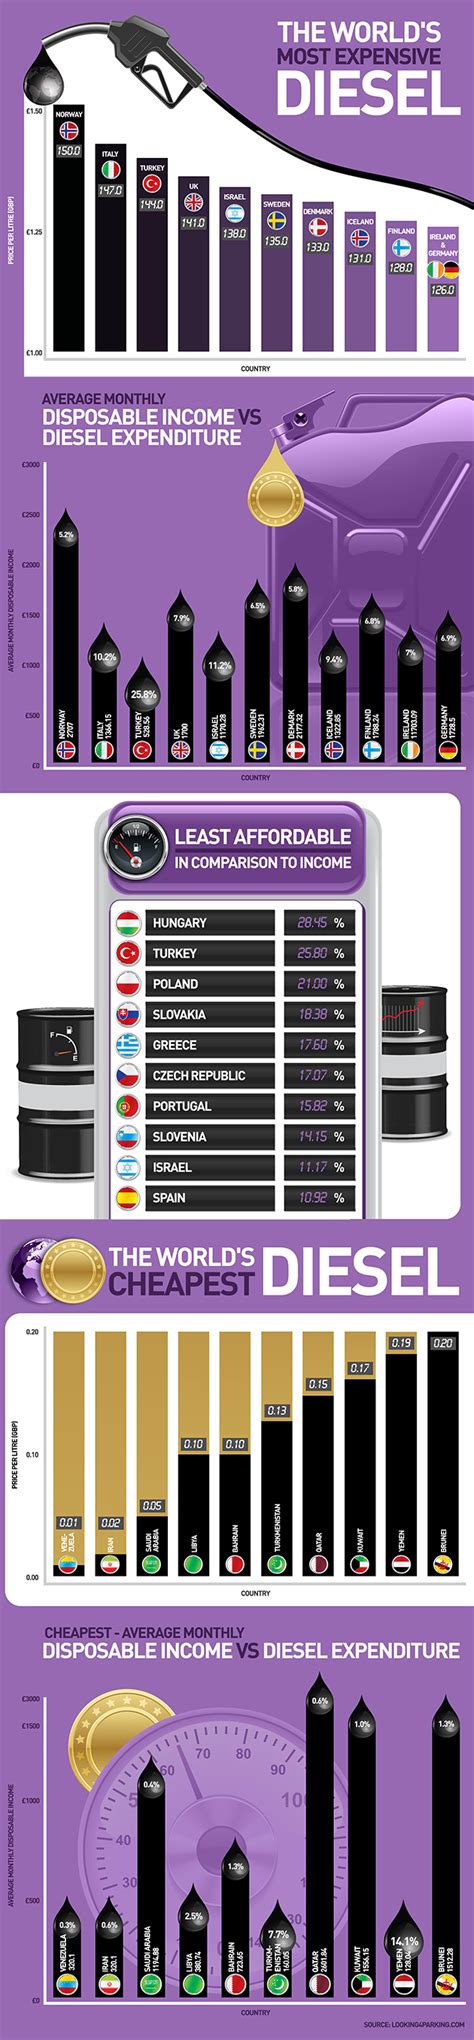 The Worlds Cheapest And Most Expensive Diesel Visually